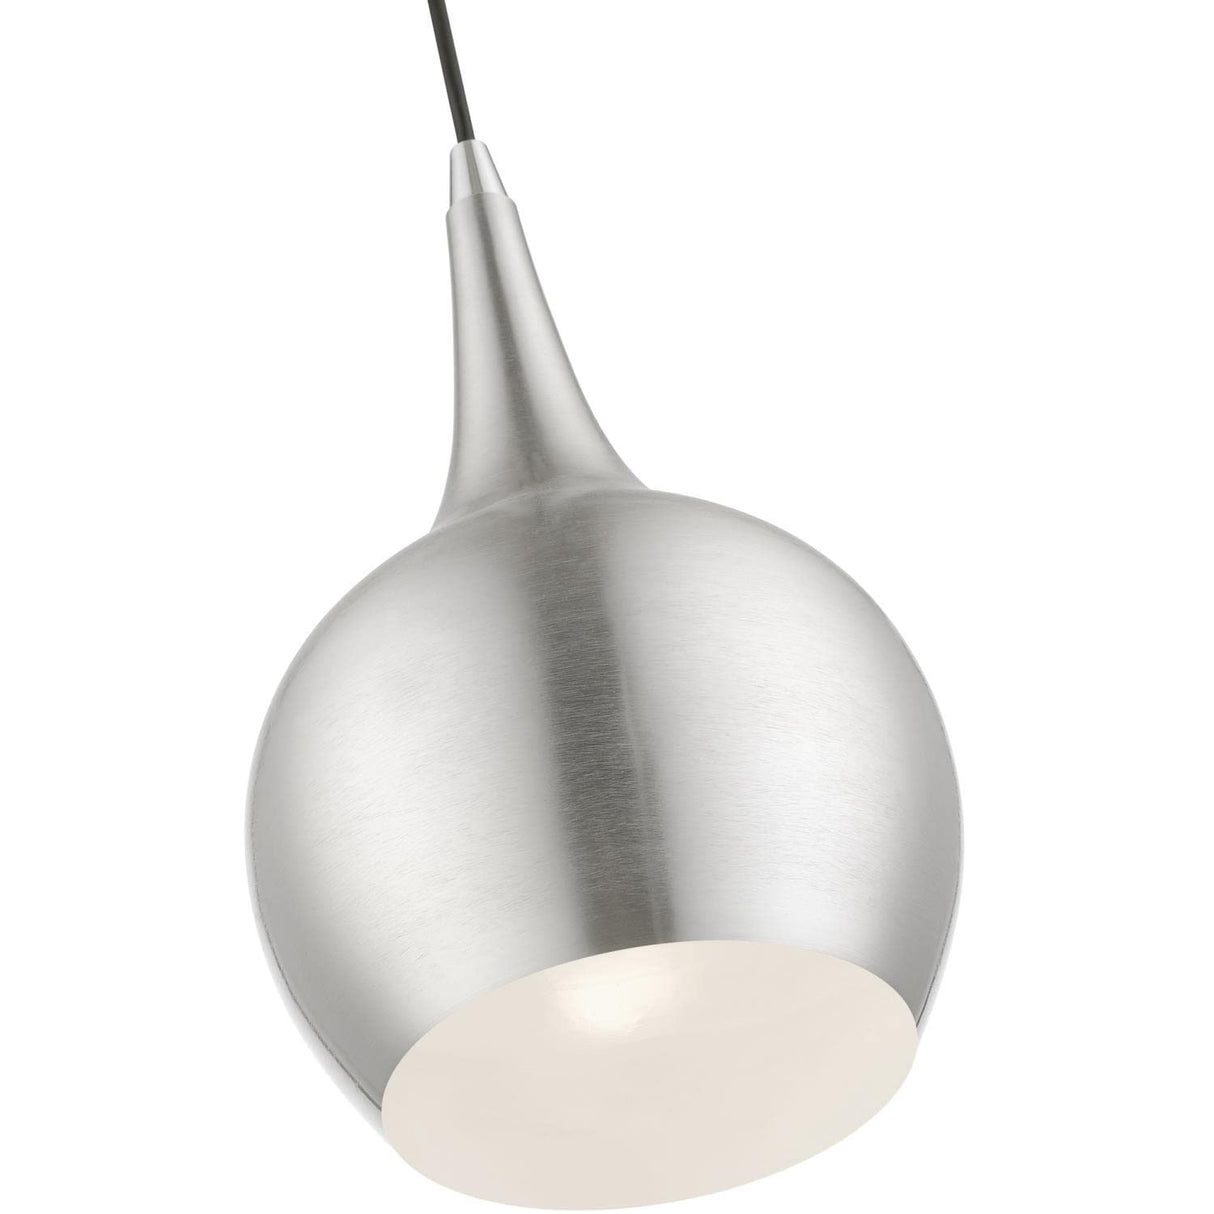 Andes 1 Light Mini Pendant in Brushed Nickel with Polished Chrome (49016-91)